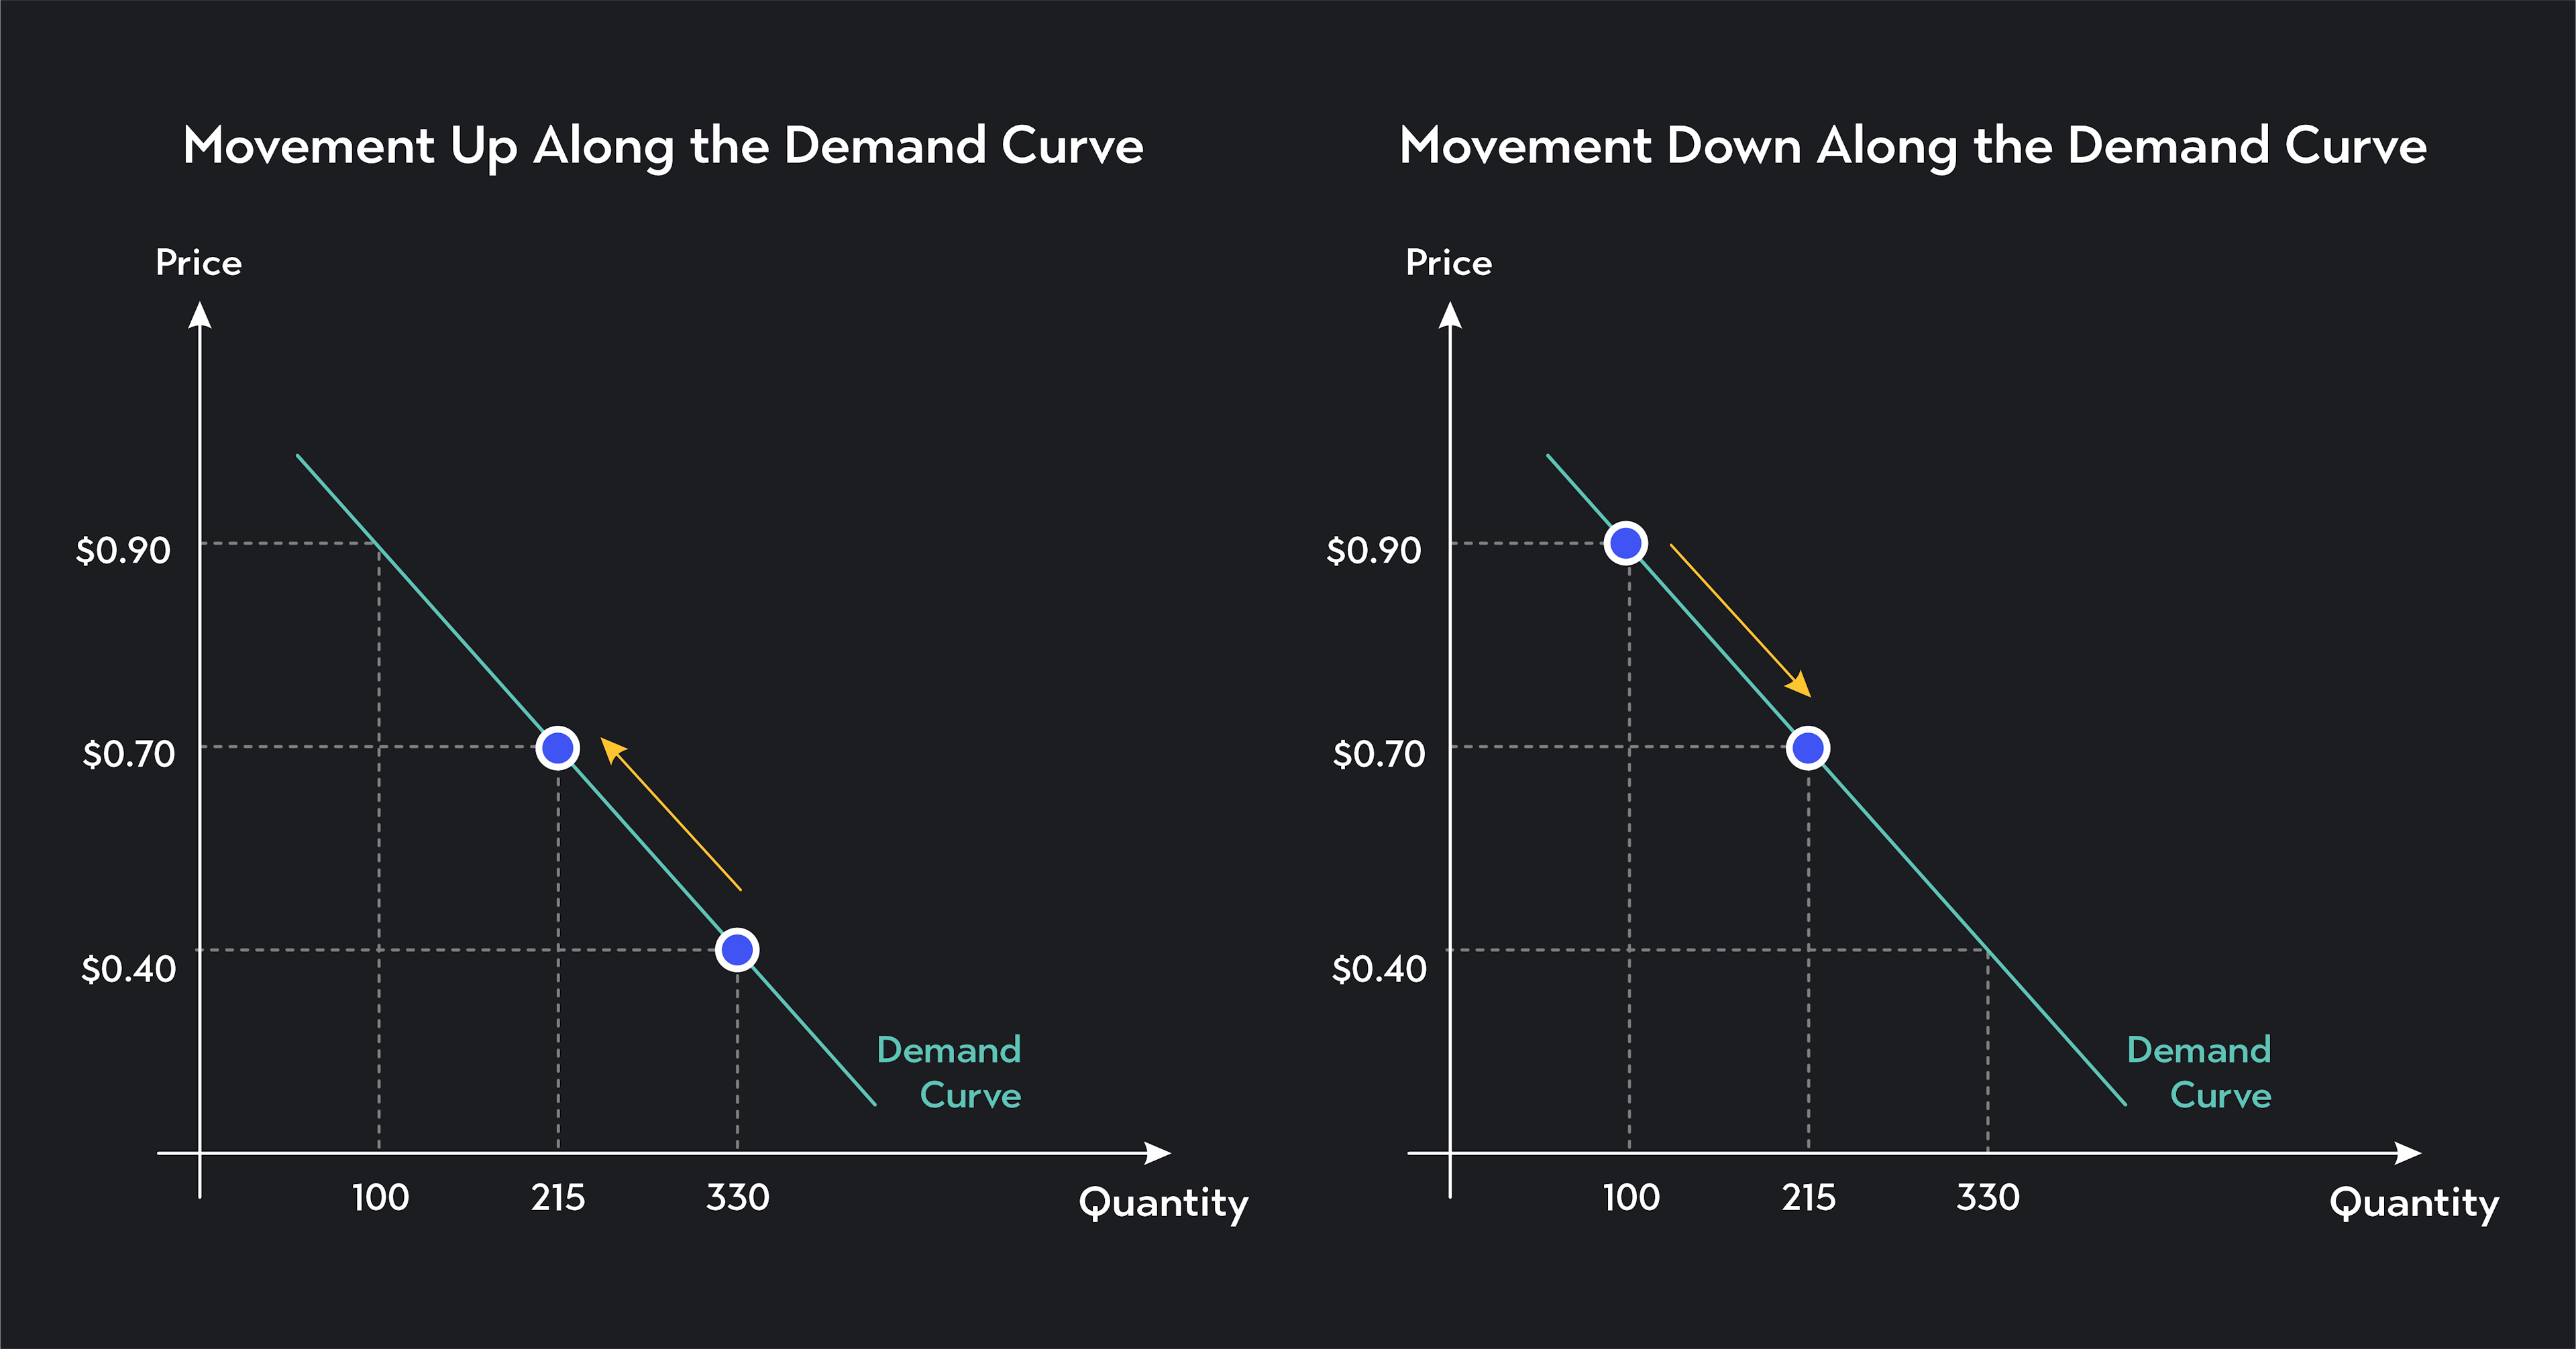 Graph showing movement up along the demand curve and movement down along the demand curve